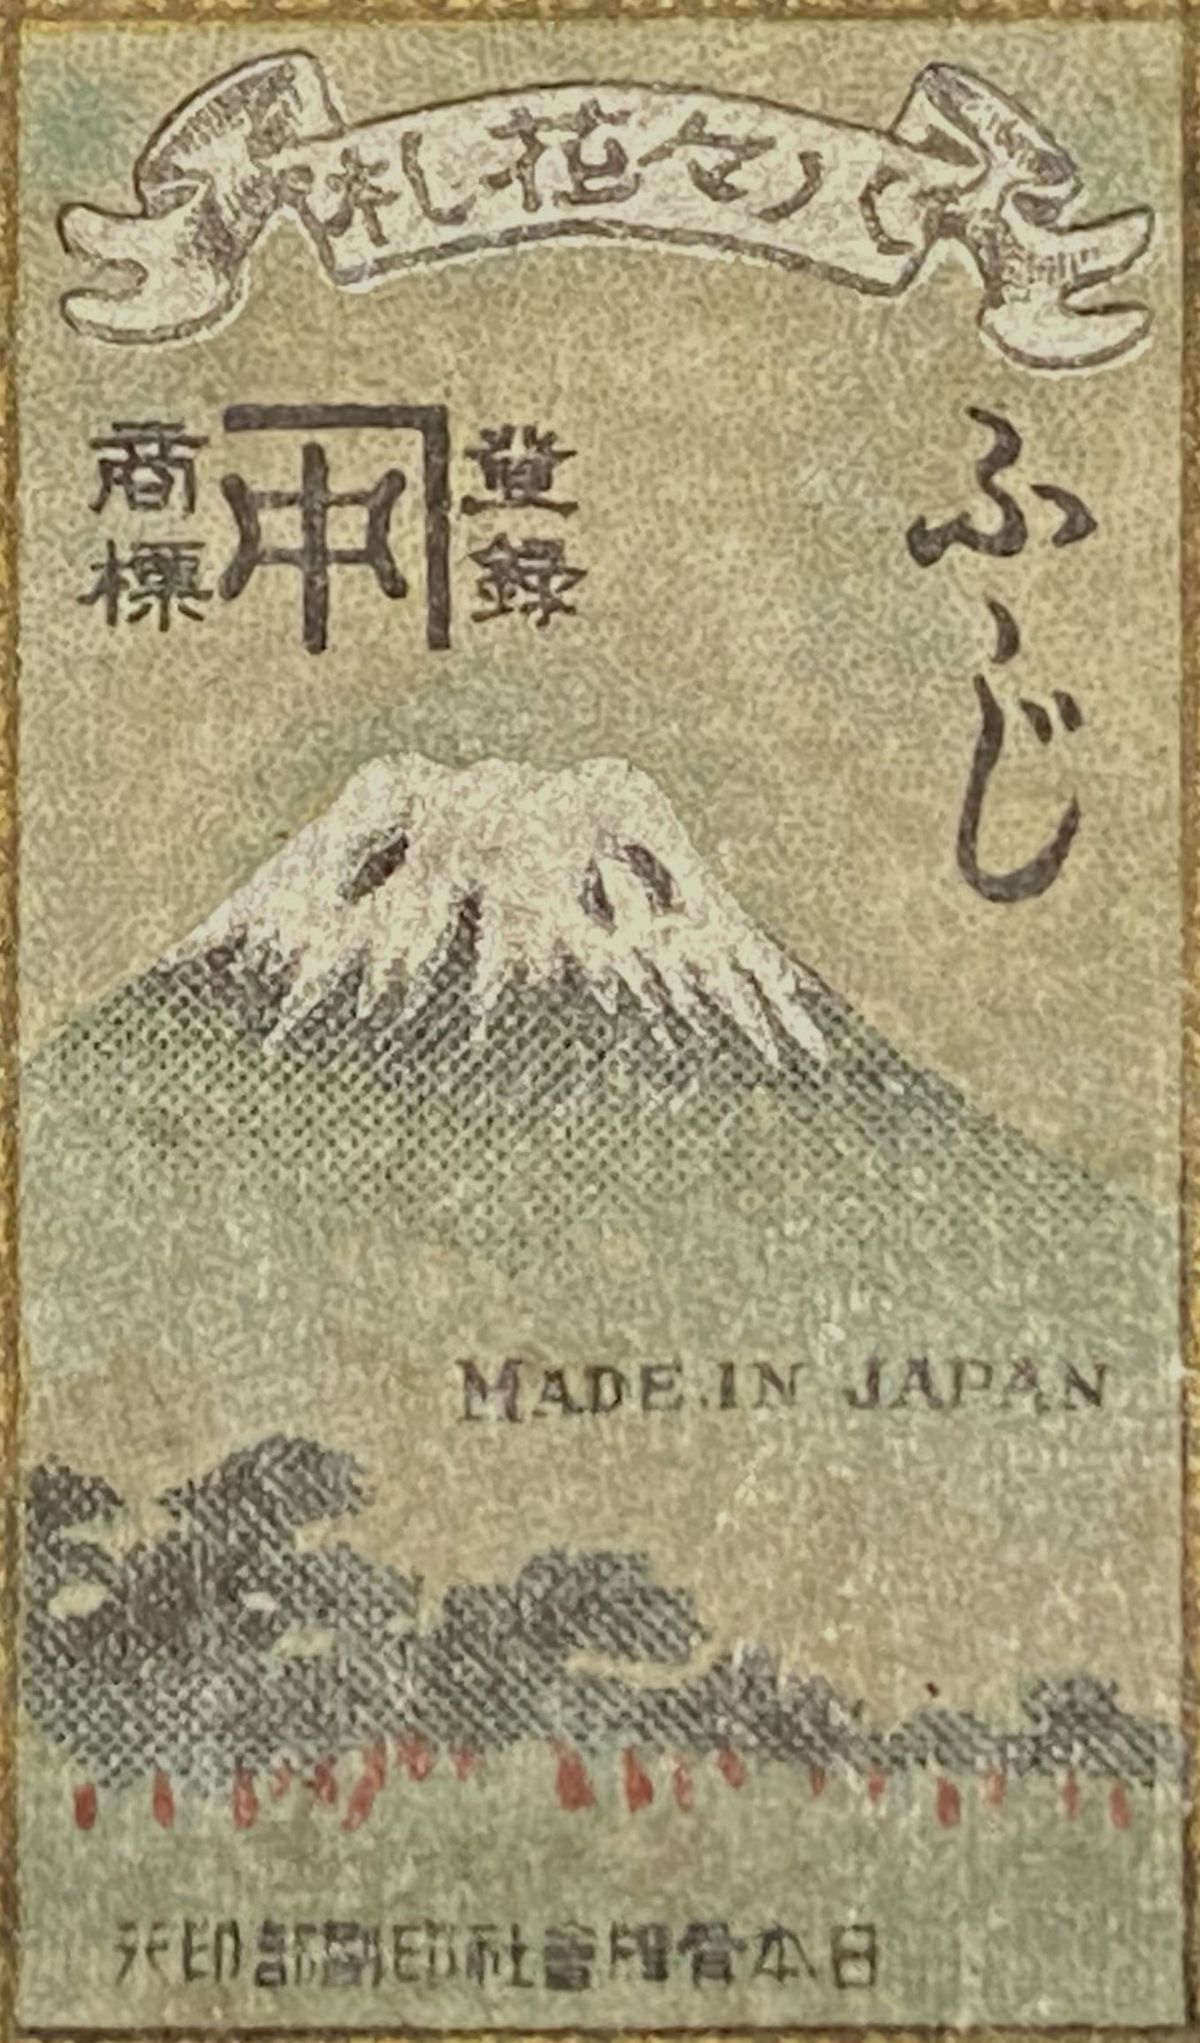 A hanafuda wrapper with an image of Mount Fuji